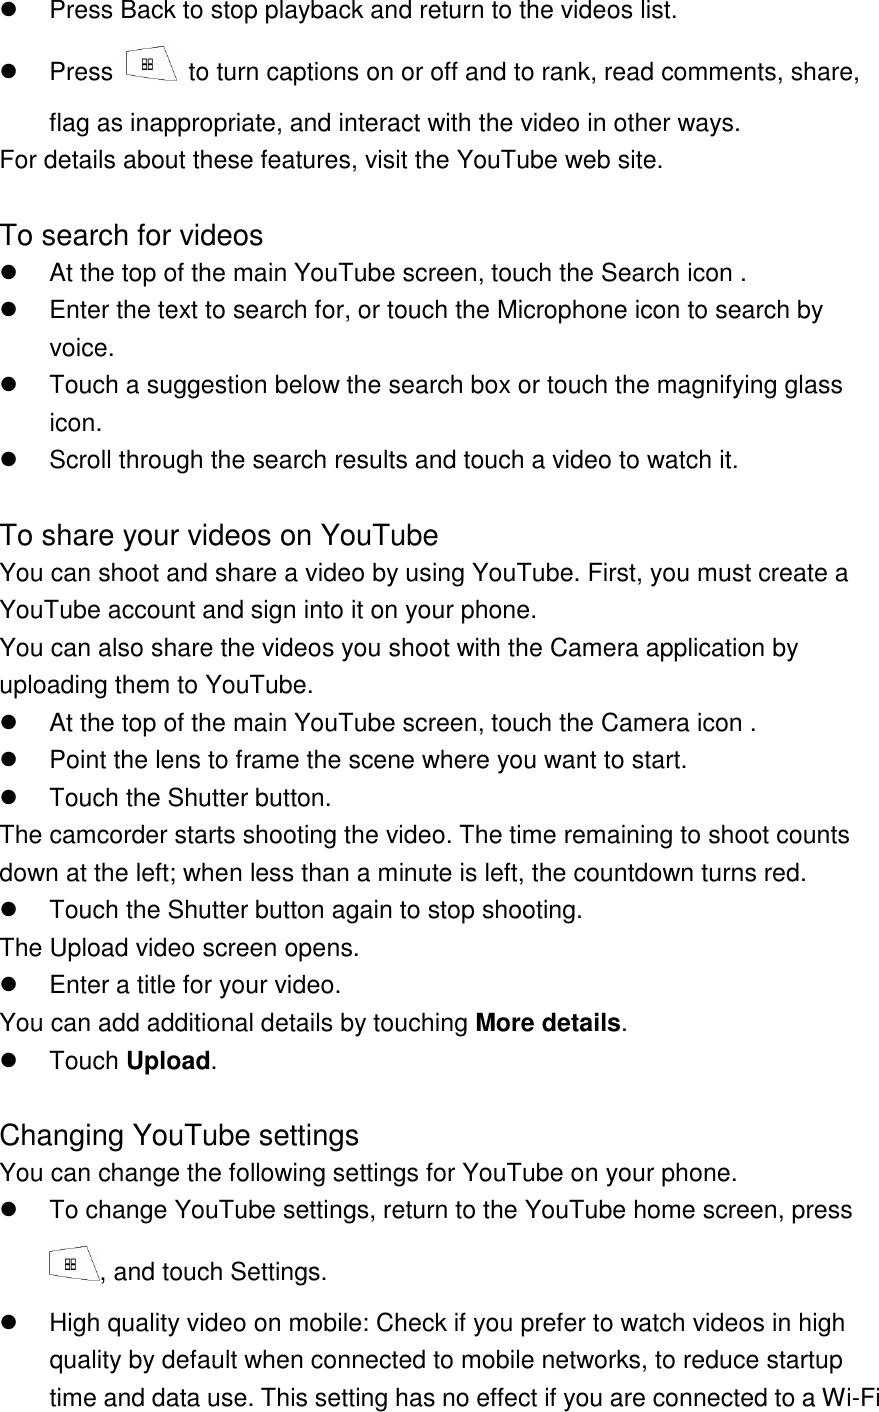   Press Back to stop playback and return to the videos list.   Press    to turn captions on or off and to rank, read comments, share, flag as inappropriate, and interact with the video in other ways. For details about these features, visit the YouTube web site.  To search for videos   At the top of the main YouTube screen, touch the Search icon .   Enter the text to search for, or touch the Microphone icon to search by voice.   Touch a suggestion below the search box or touch the magnifying glass icon.   Scroll through the search results and touch a video to watch it.  To share your videos on YouTube You can shoot and share a video by using YouTube. First, you must create a YouTube account and sign into it on your phone. You can also share the videos you shoot with the Camera application by uploading them to YouTube.   At the top of the main YouTube screen, touch the Camera icon .   Point the lens to frame the scene where you want to start.   Touch the Shutter button. The camcorder starts shooting the video. The time remaining to shoot counts down at the left; when less than a minute is left, the countdown turns red.   Touch the Shutter button again to stop shooting. The Upload video screen opens.   Enter a title for your video. You can add additional details by touching More details.   Touch Upload.  Changing YouTube settings You can change the following settings for YouTube on your phone.   To change YouTube settings, return to the YouTube home screen, press , and touch Settings.   High quality video on mobile: Check if you prefer to watch videos in high quality by default when connected to mobile networks, to reduce startup time and data use. This setting has no effect if you are connected to a Wi-Fi 